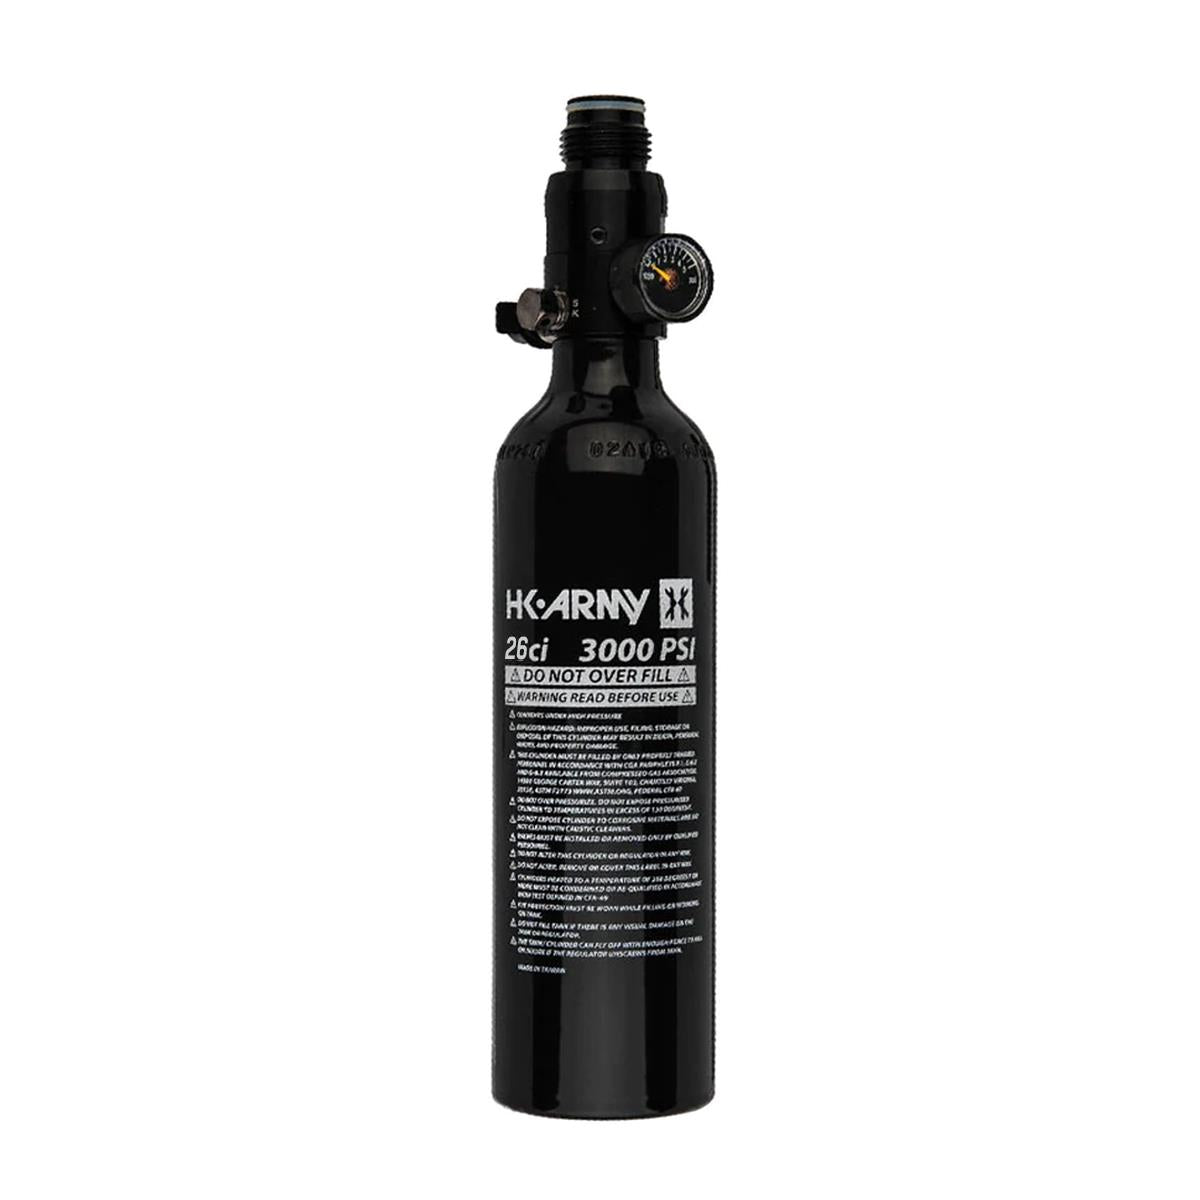 HK Army 26ci / 3000psi Aluminum Compressed Air HPA Paintball Tank - Black HK Army